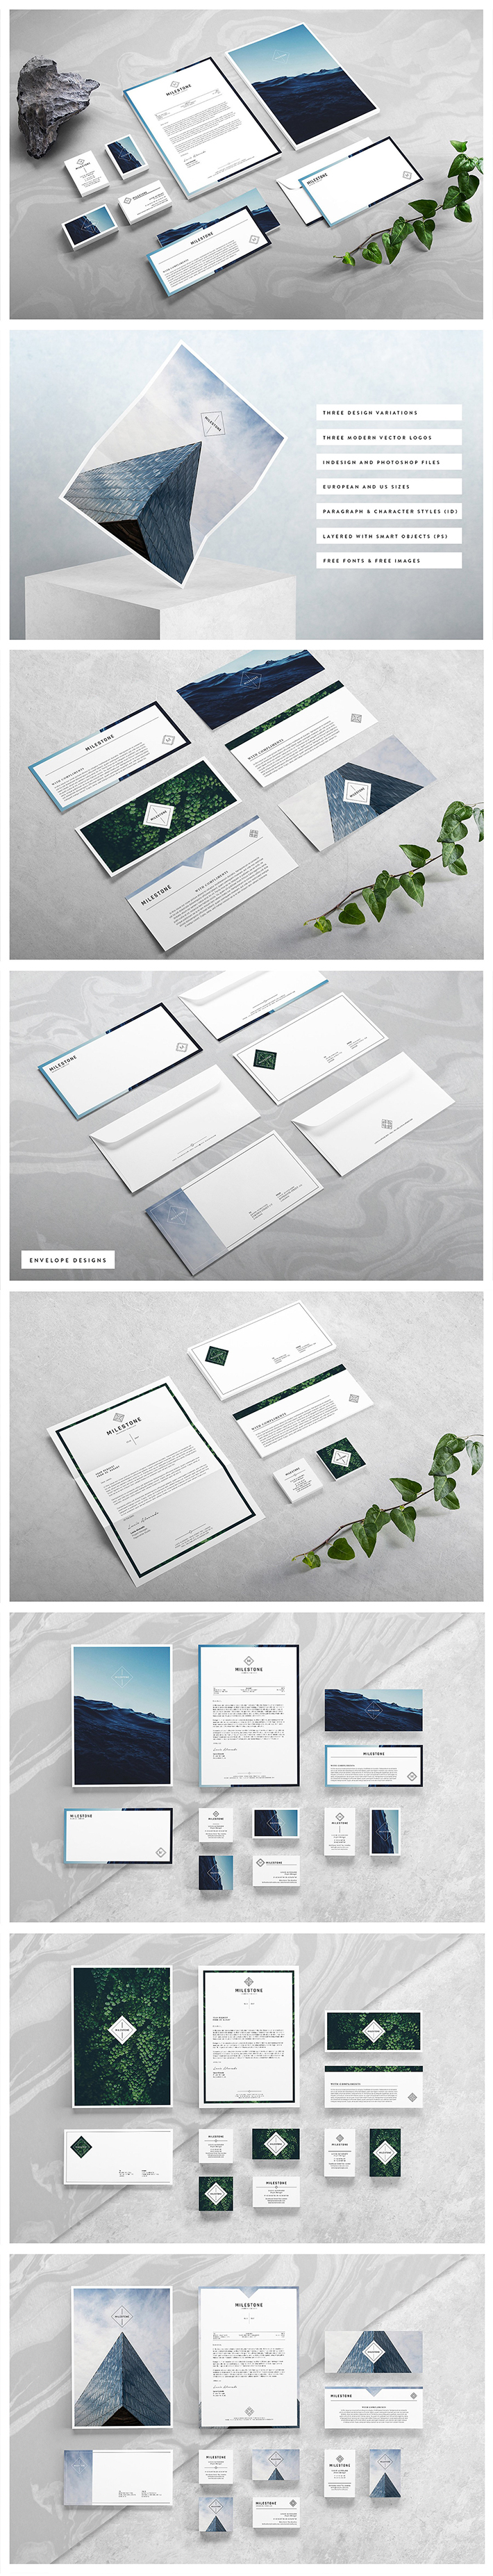 Free Download Creative Milestone Stationery Collection